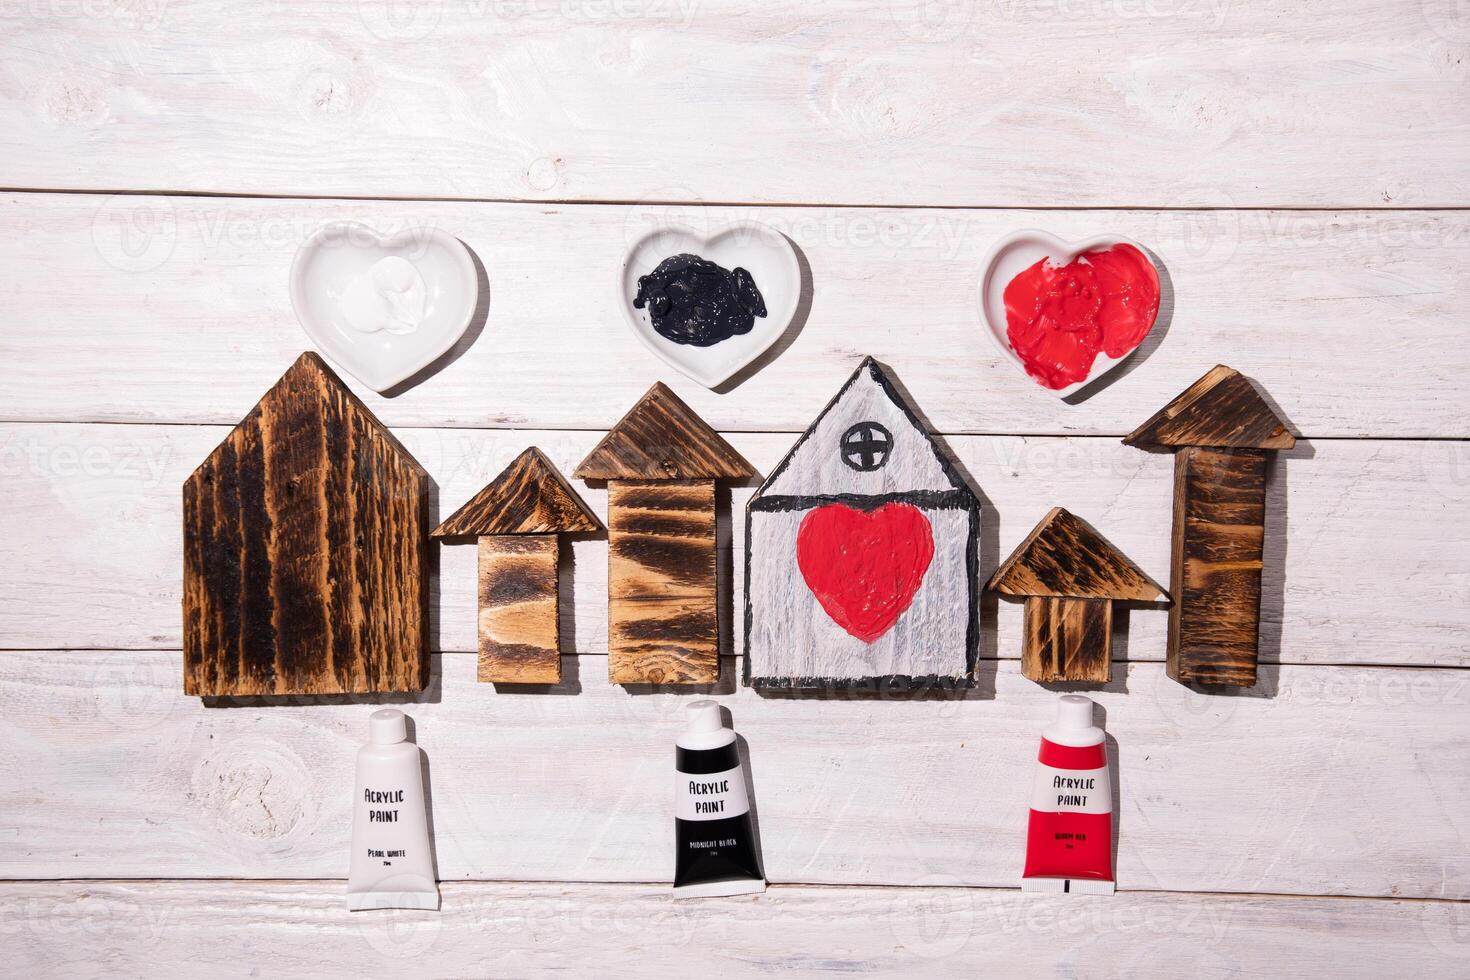 how to draw a heart on a wooden house, crafting, step by step instructions photo